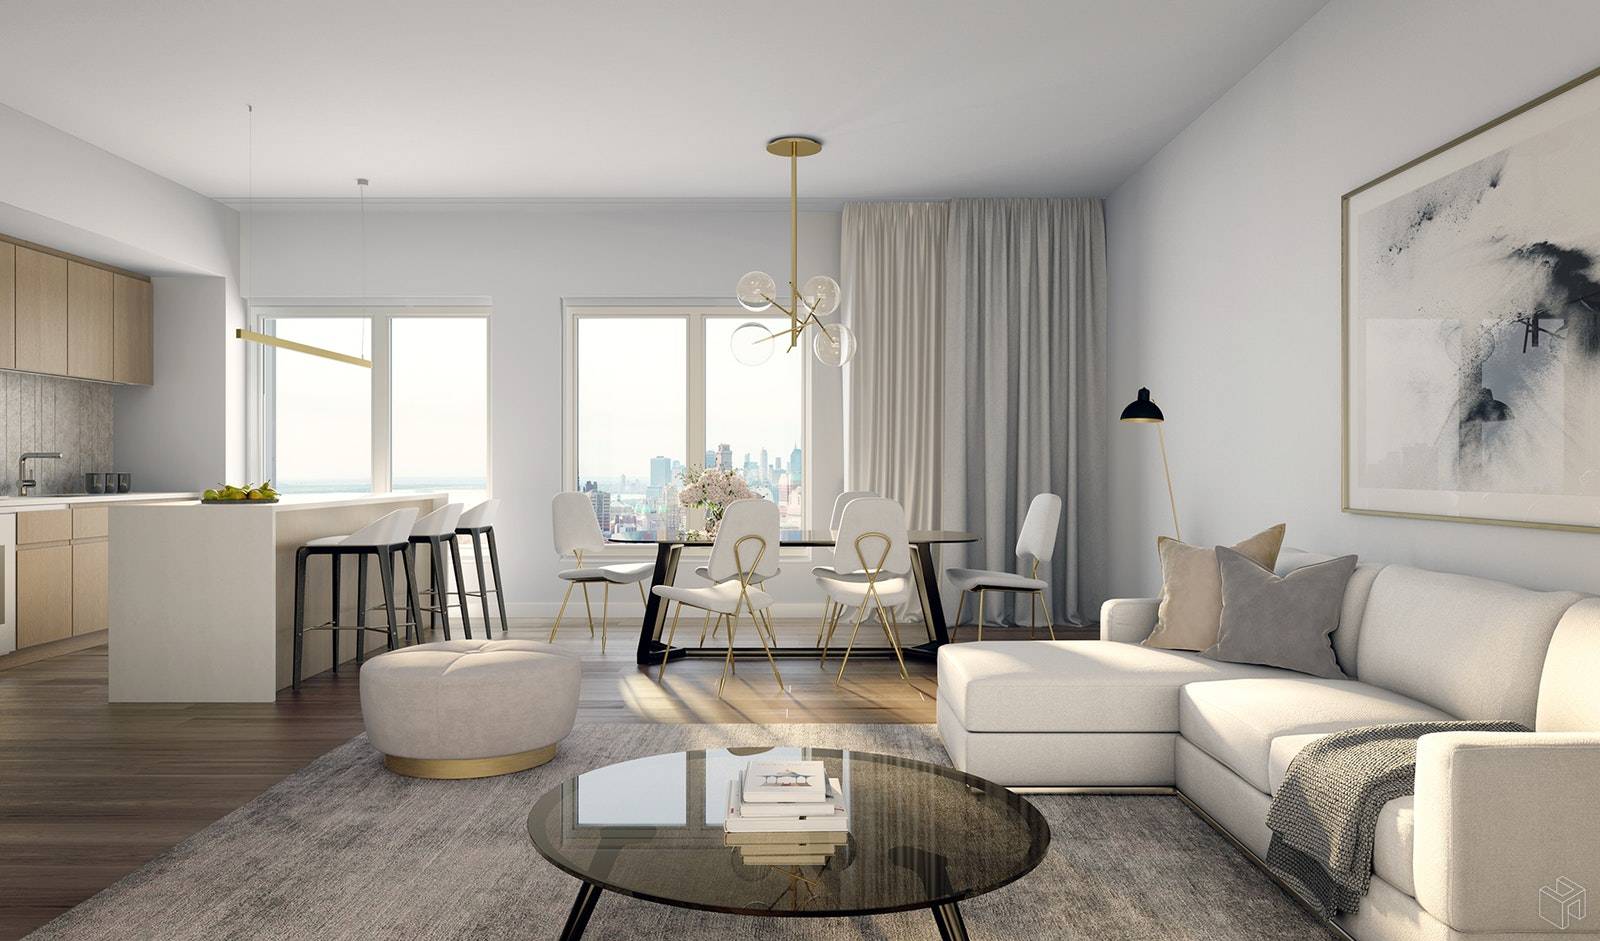 This West facing residence overlooking Downtown Brooklyn has an open plan and luxurious master suite, second bedroom with walk in closet, and large kitchen with dining area.